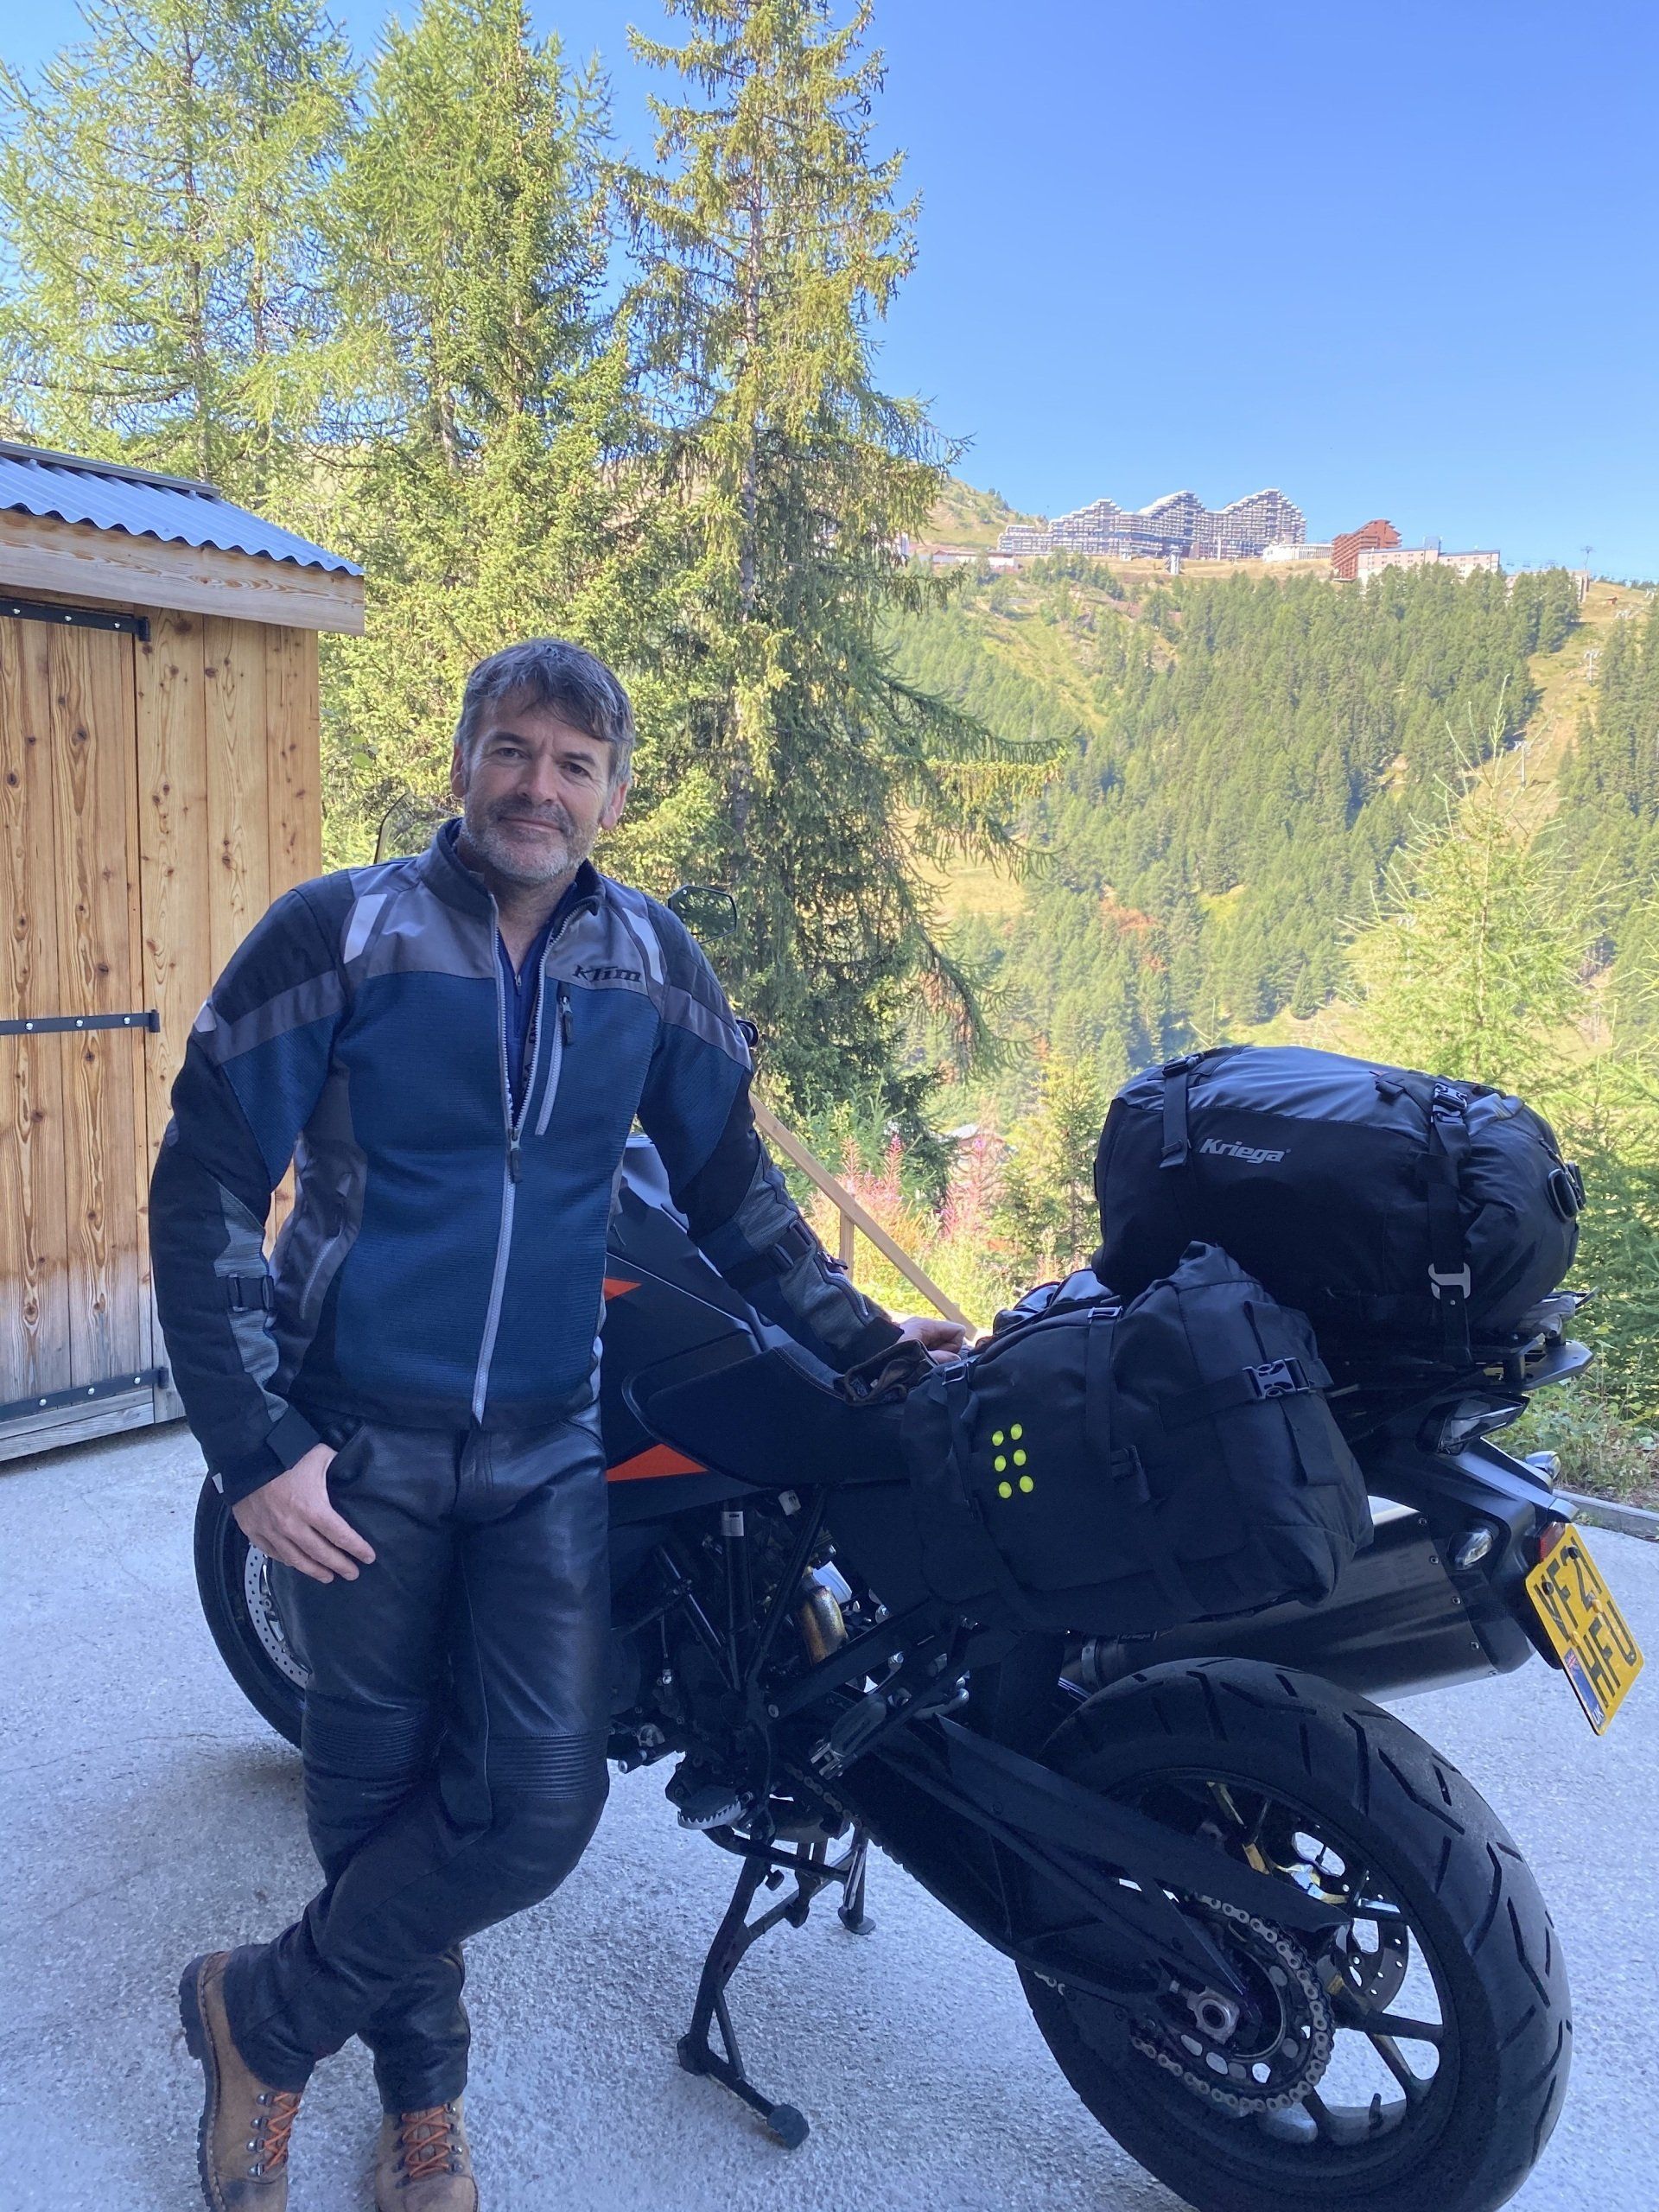 Brett and his Motorbike at Chalet Marmotte